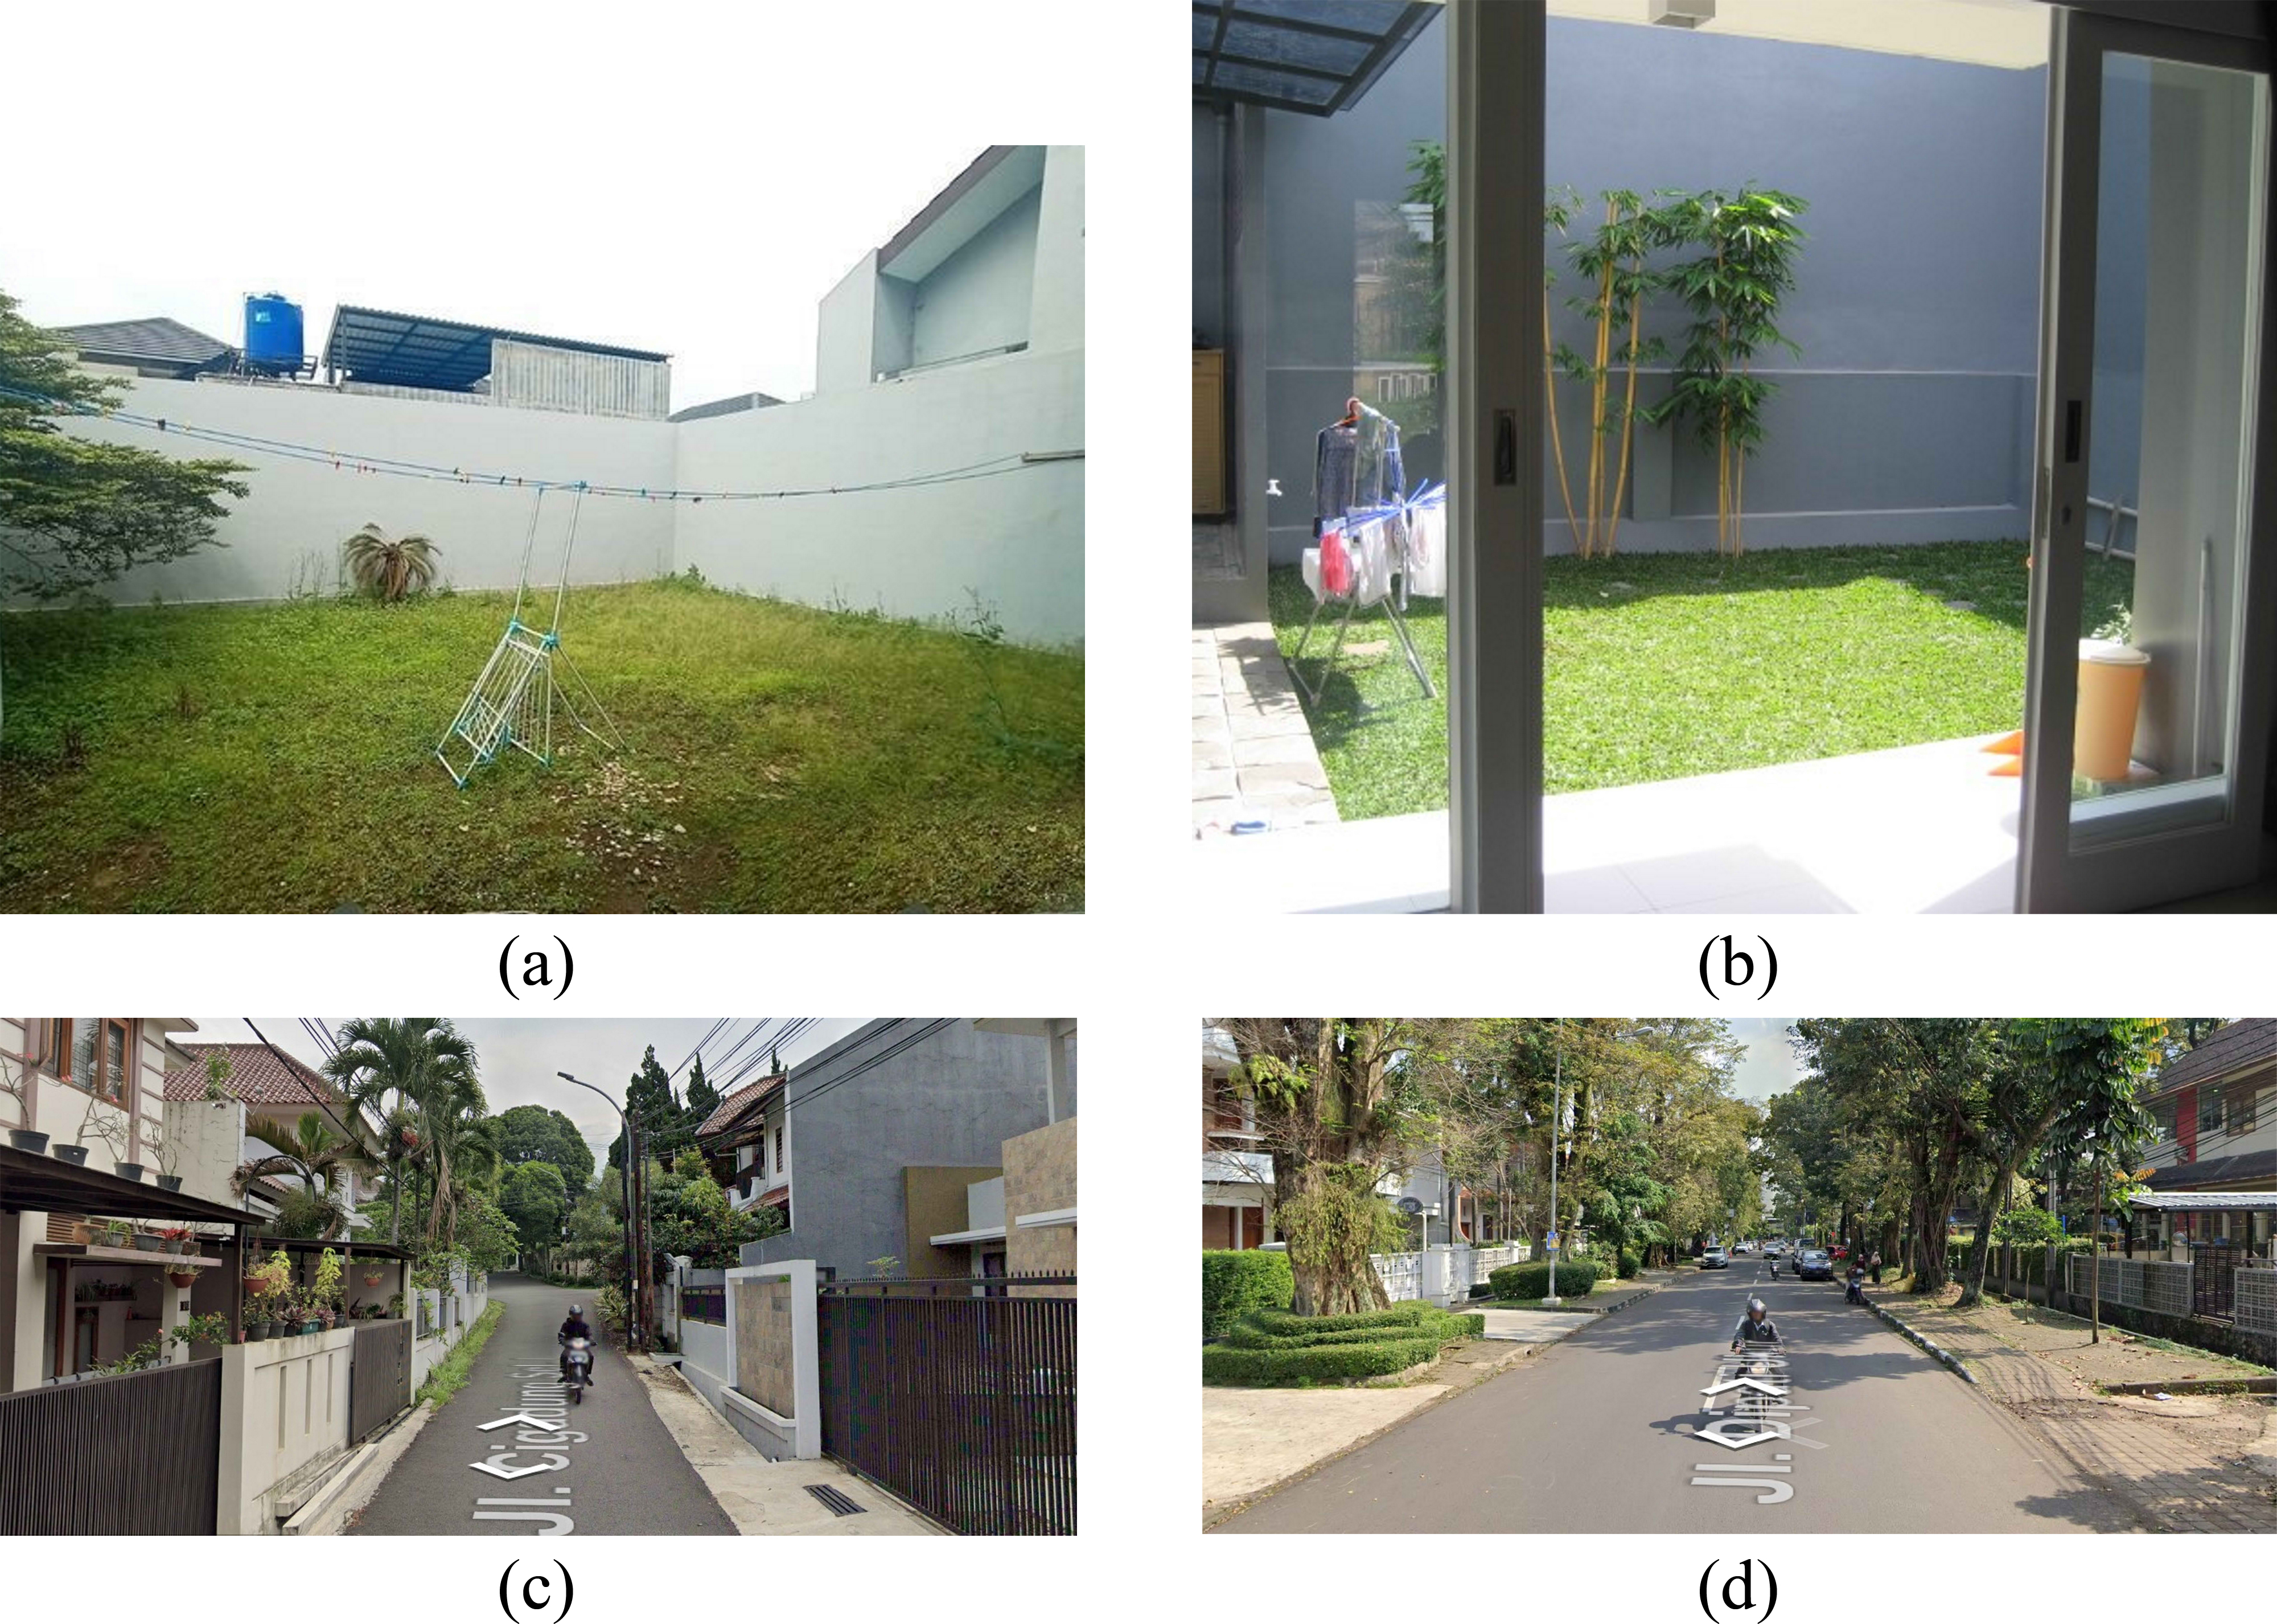 Real images examples of (a) courtyard with h ≈ 3 m (source: https://www.jualo.com), (b) courtyard with h ≈ 6 m (source: https://rumahdijual.com), (c) street canyon with w ≈ 5 m (source: https://www.instantstreetview.com, © 2020 Google), (d) street canyon with w ≈ 10 m (source: https://www.instantstreetview.com, © 2020 Google), in the urban area of the city of Bandung.